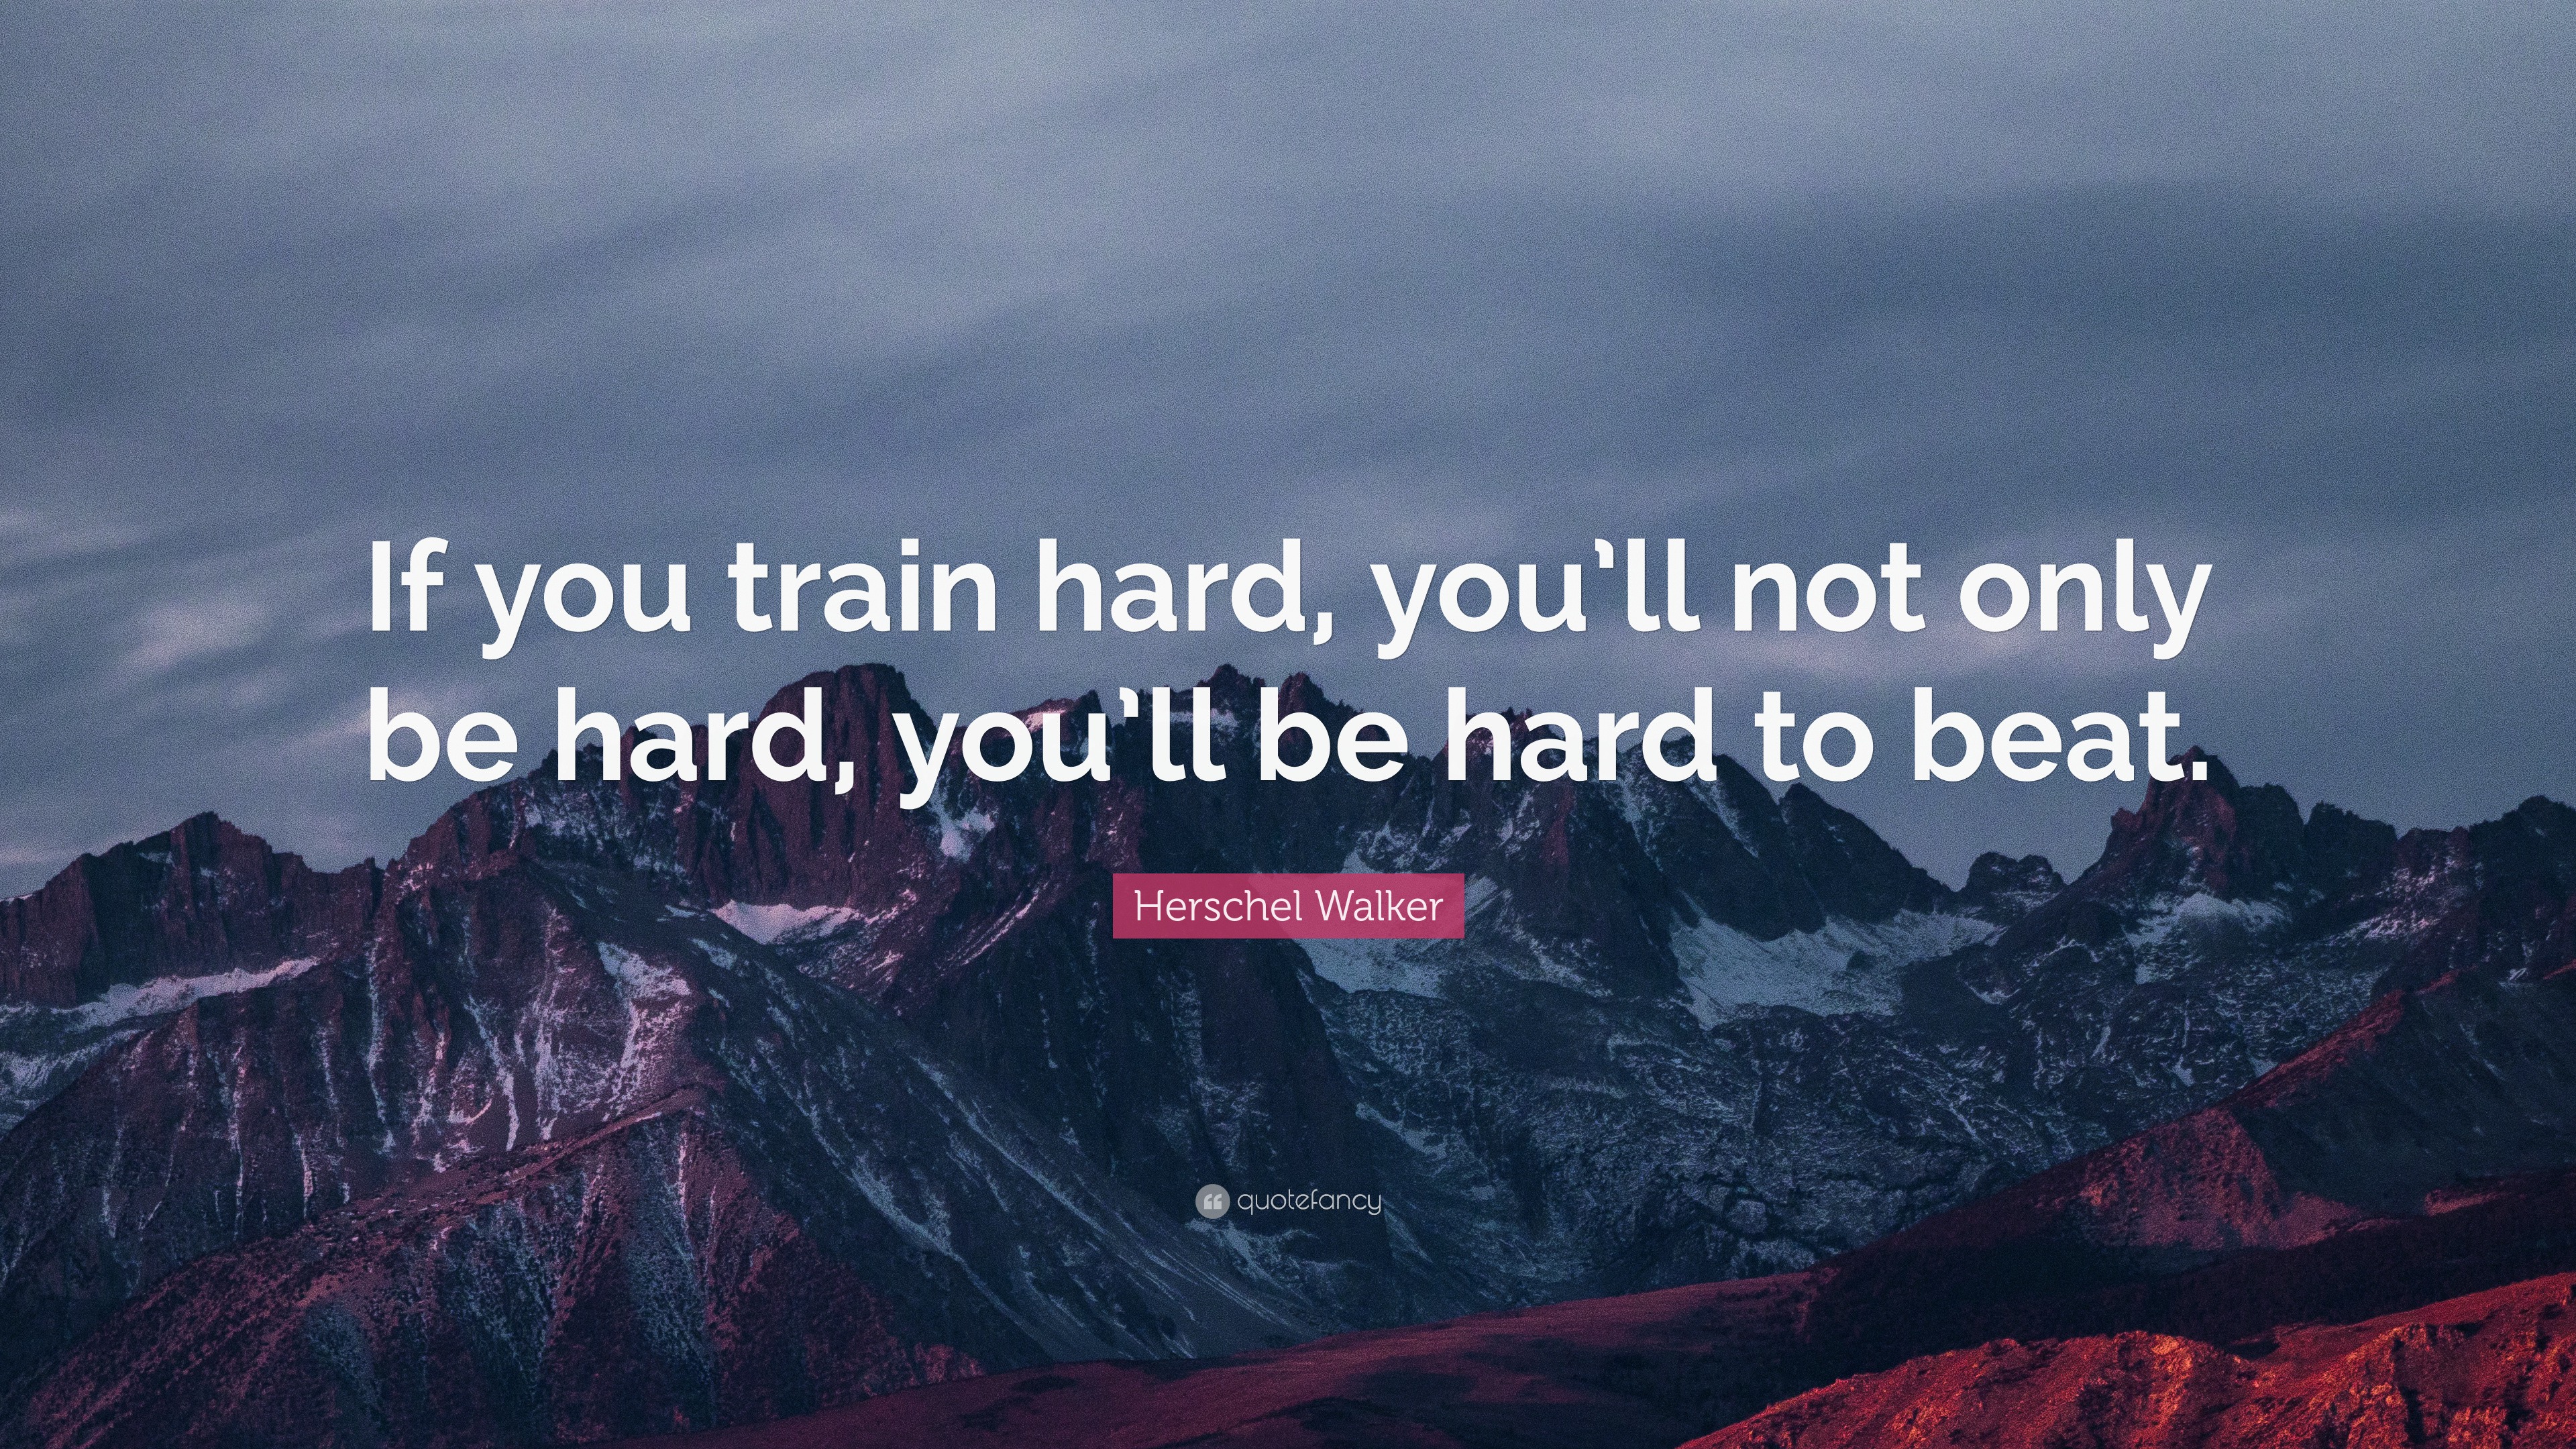 Herschel Walker Quote: “If you train hard, you’ll not only be hard, you ...